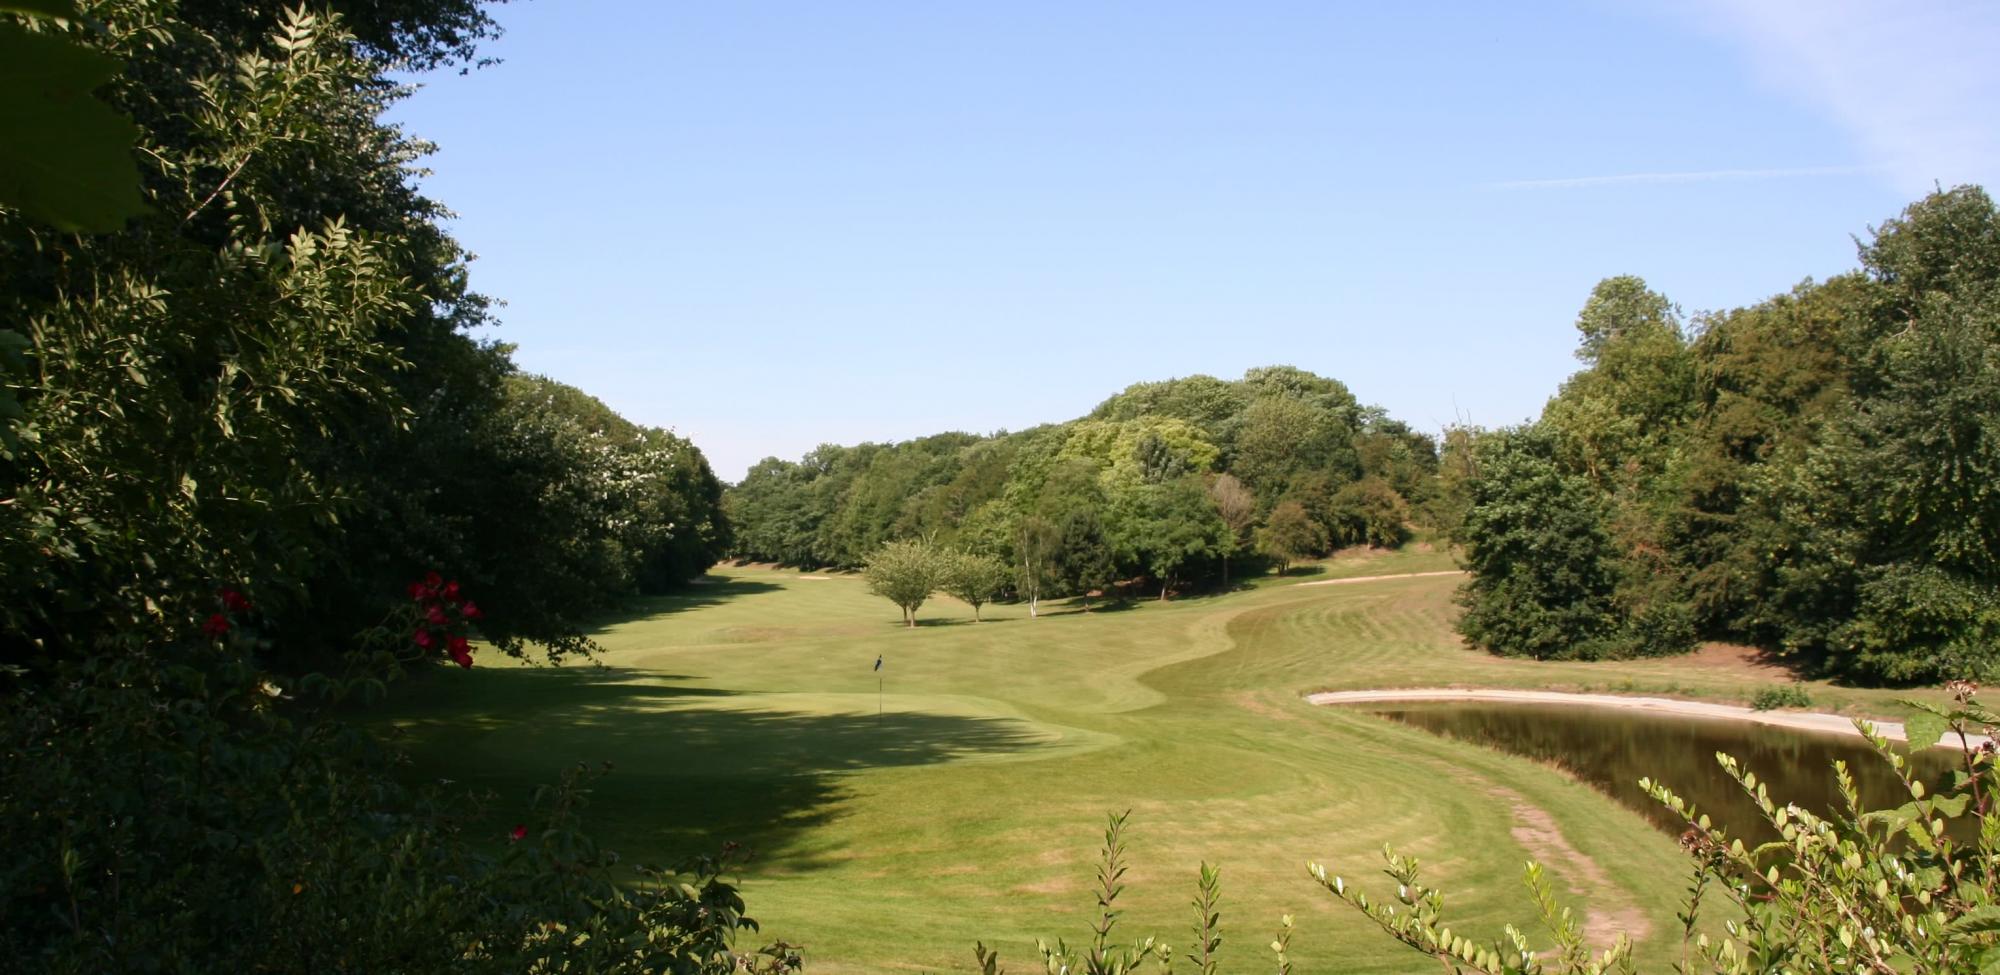 Golf de Caen hosts lots of the most desirable golf course in Normandy